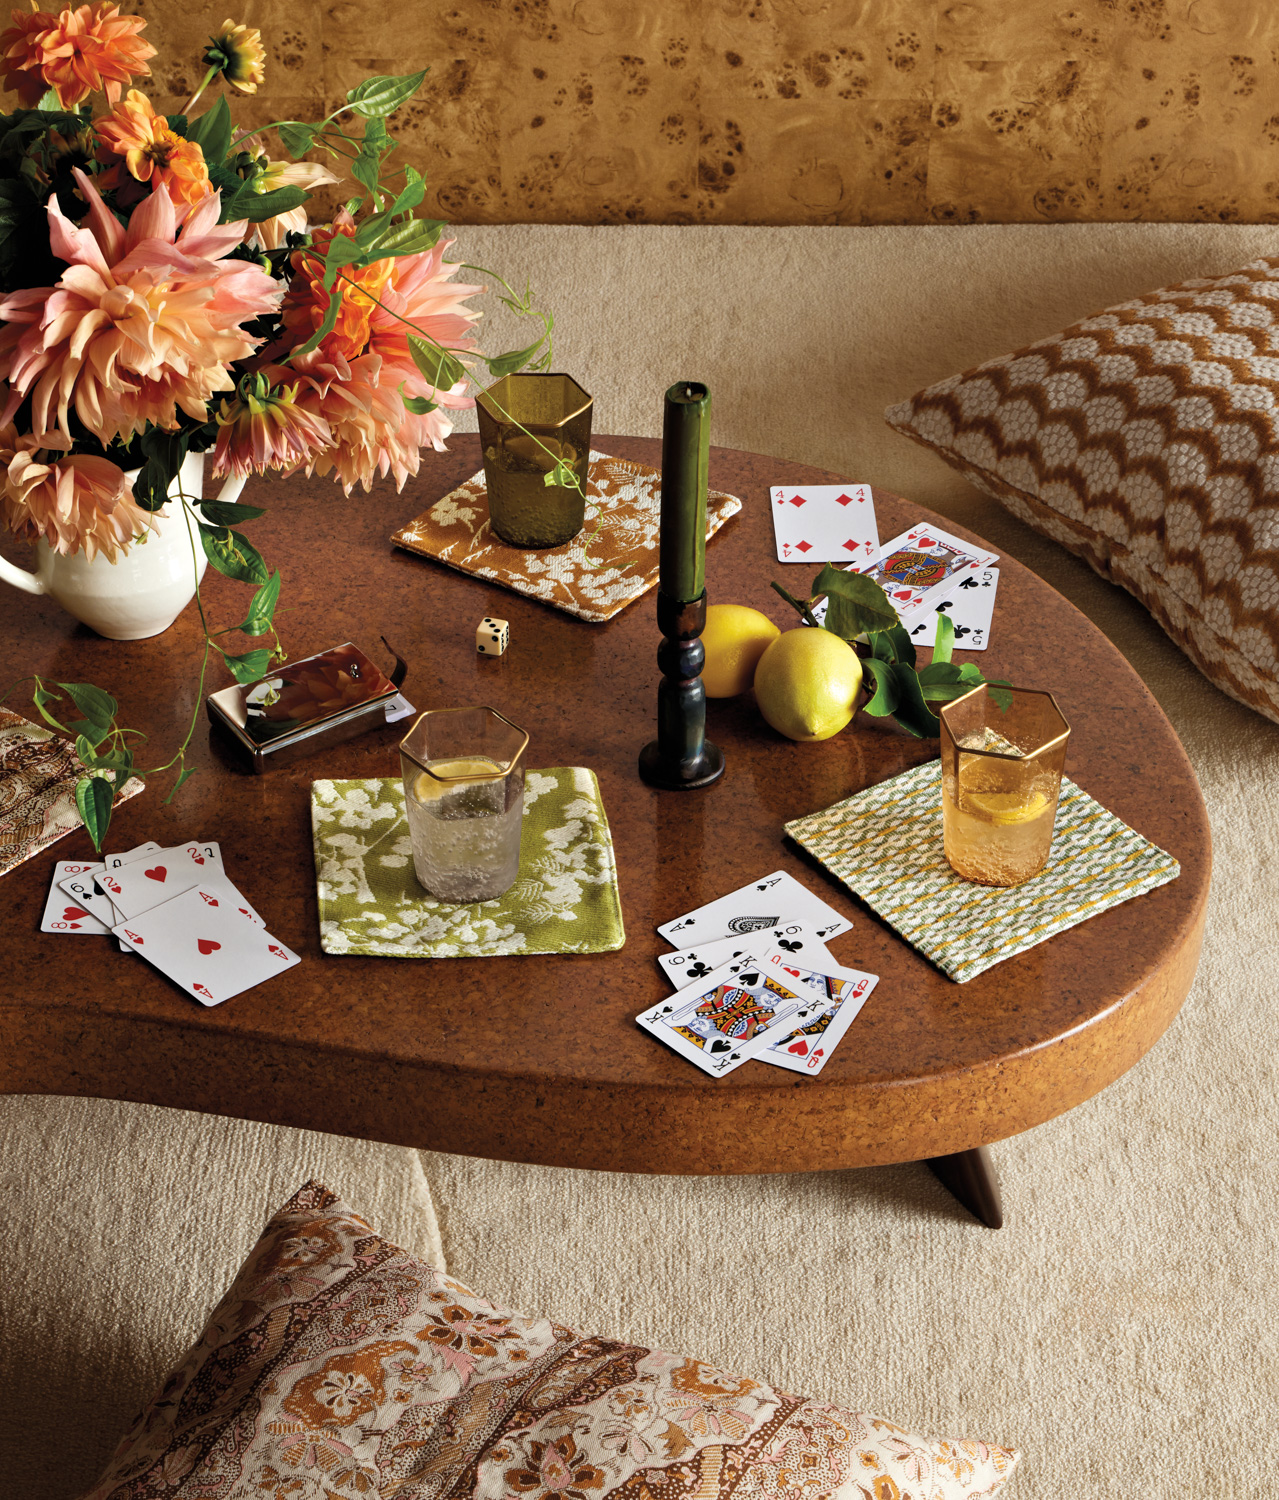 Playing cards atop a coffee table in a home with '70s accents and materials